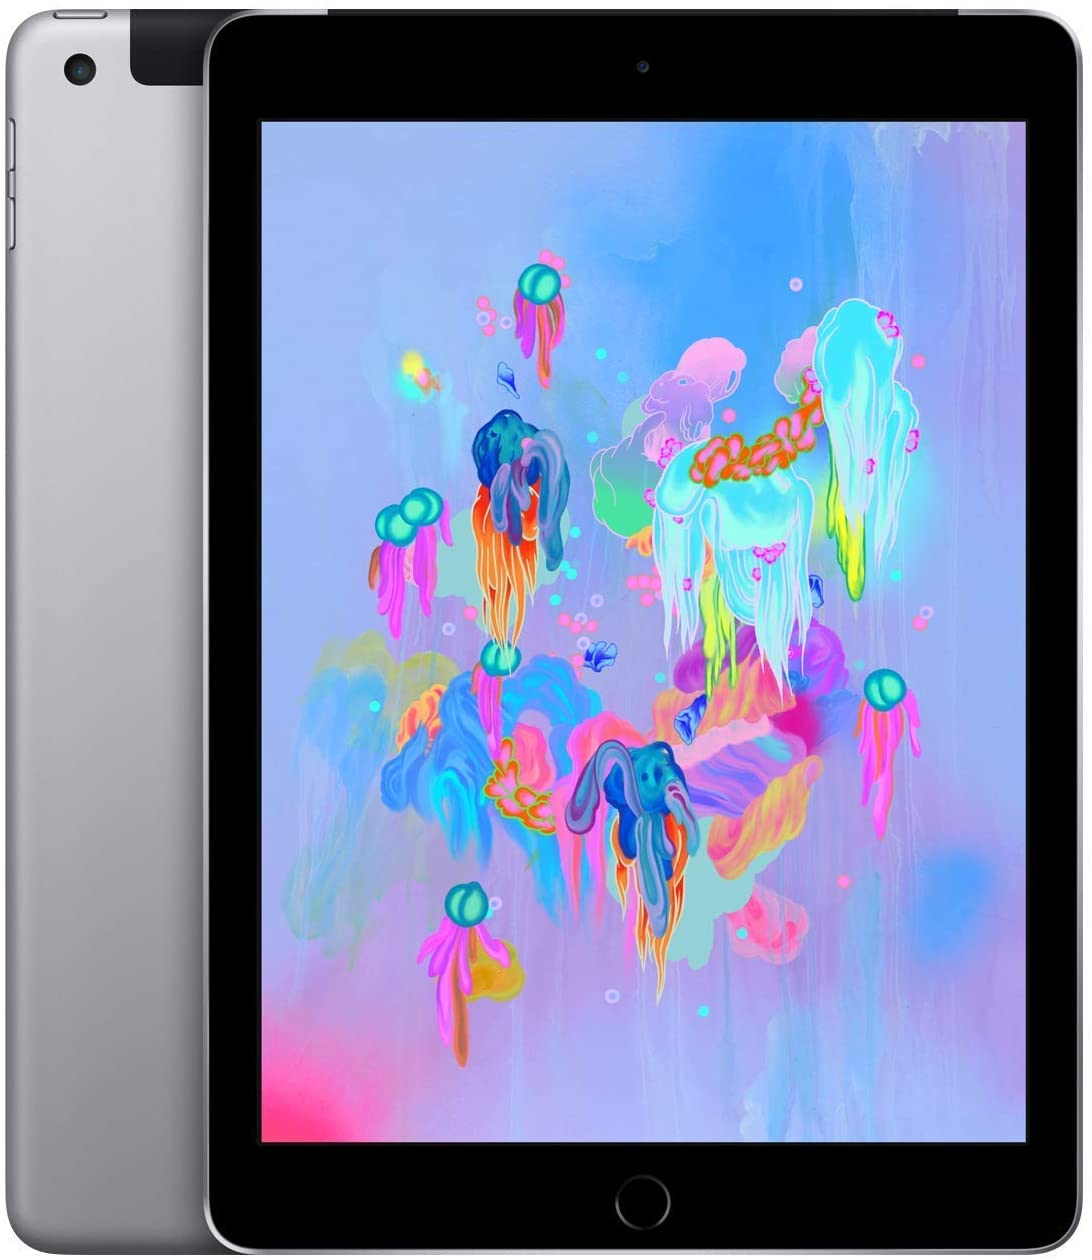 Apple iPad 6 32GB Wi-Fi + Cellular 3G/4G Space Gray (Excellent) New Battery, Glass Screen Protector & Shipping